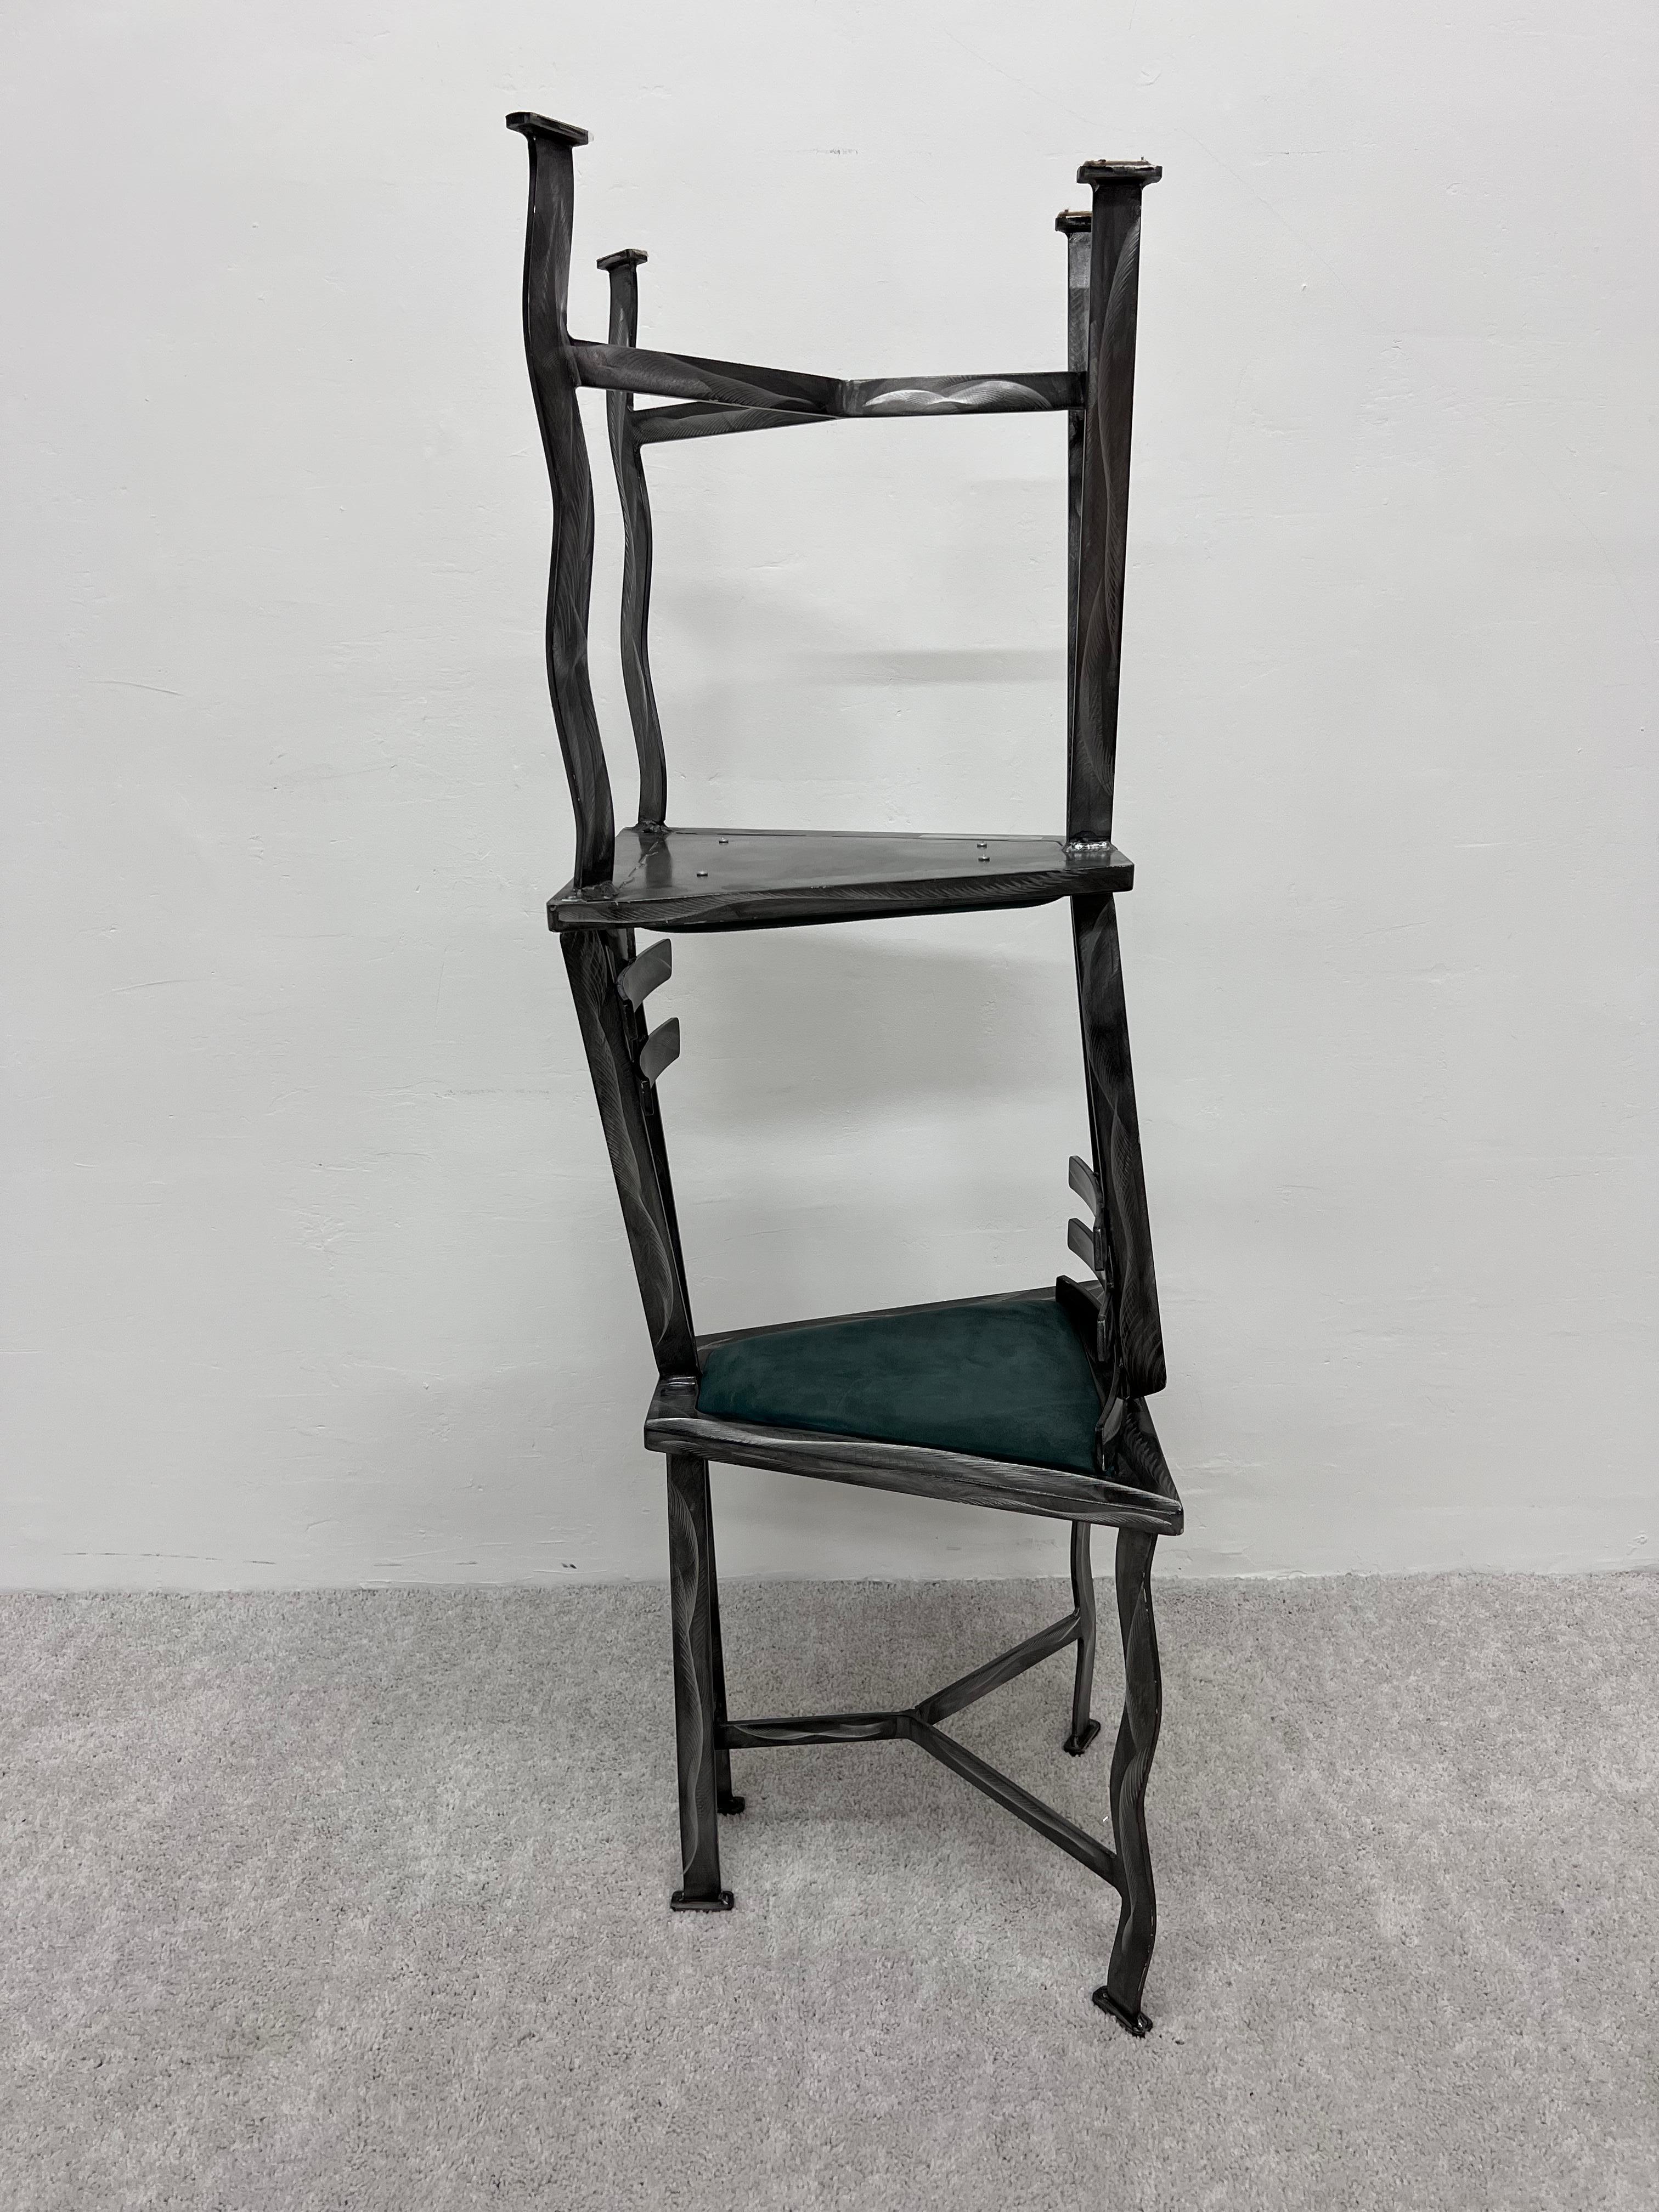 90s Postmodern Contemporary Welded Steel Studio Side Chairs, a Pair For Sale 3